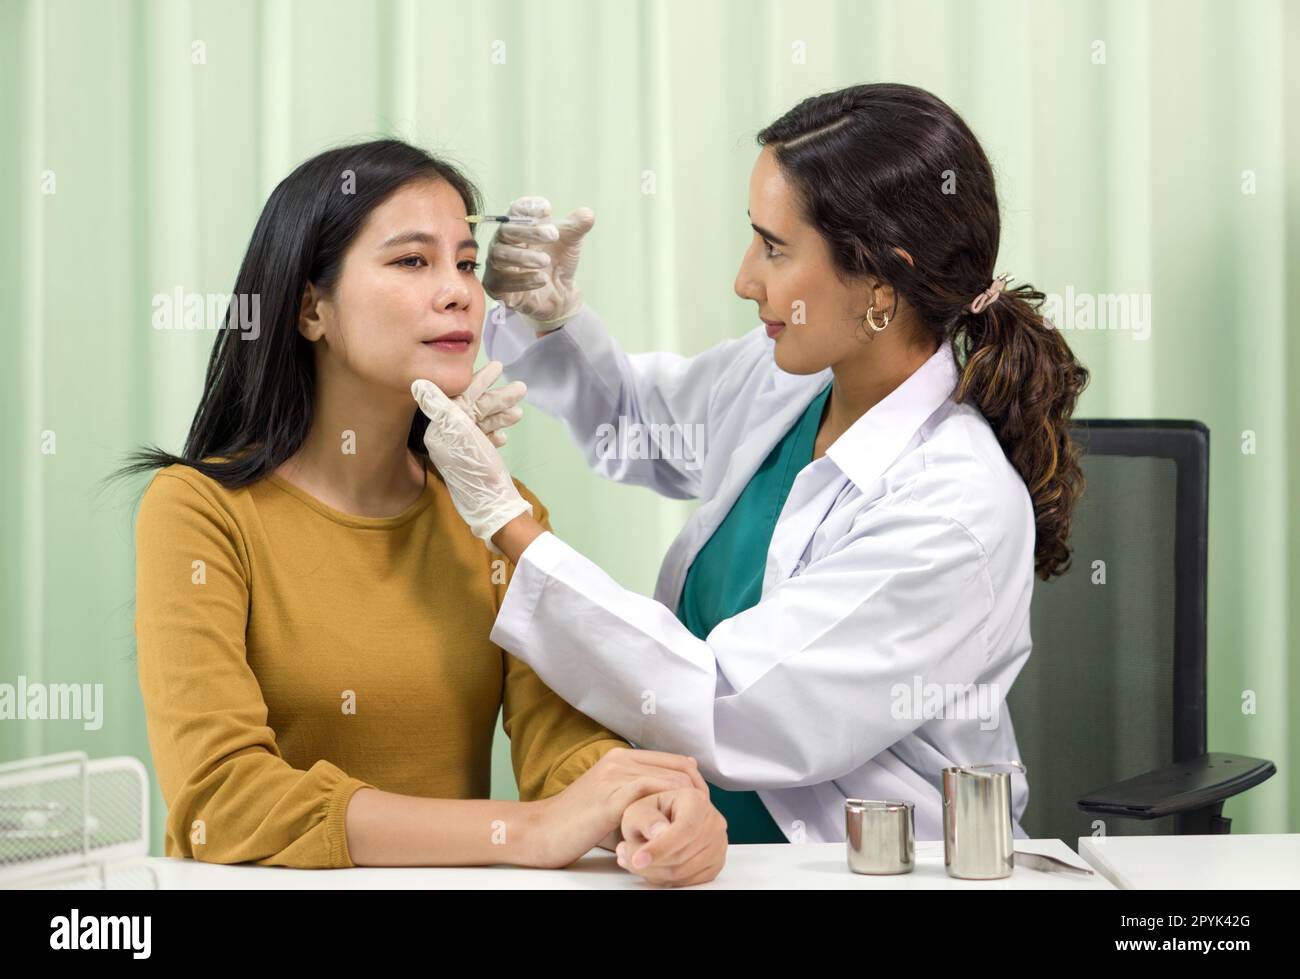 Doctor in white gown and protective glove giving female patient medical injection in forehead. Stock Photo